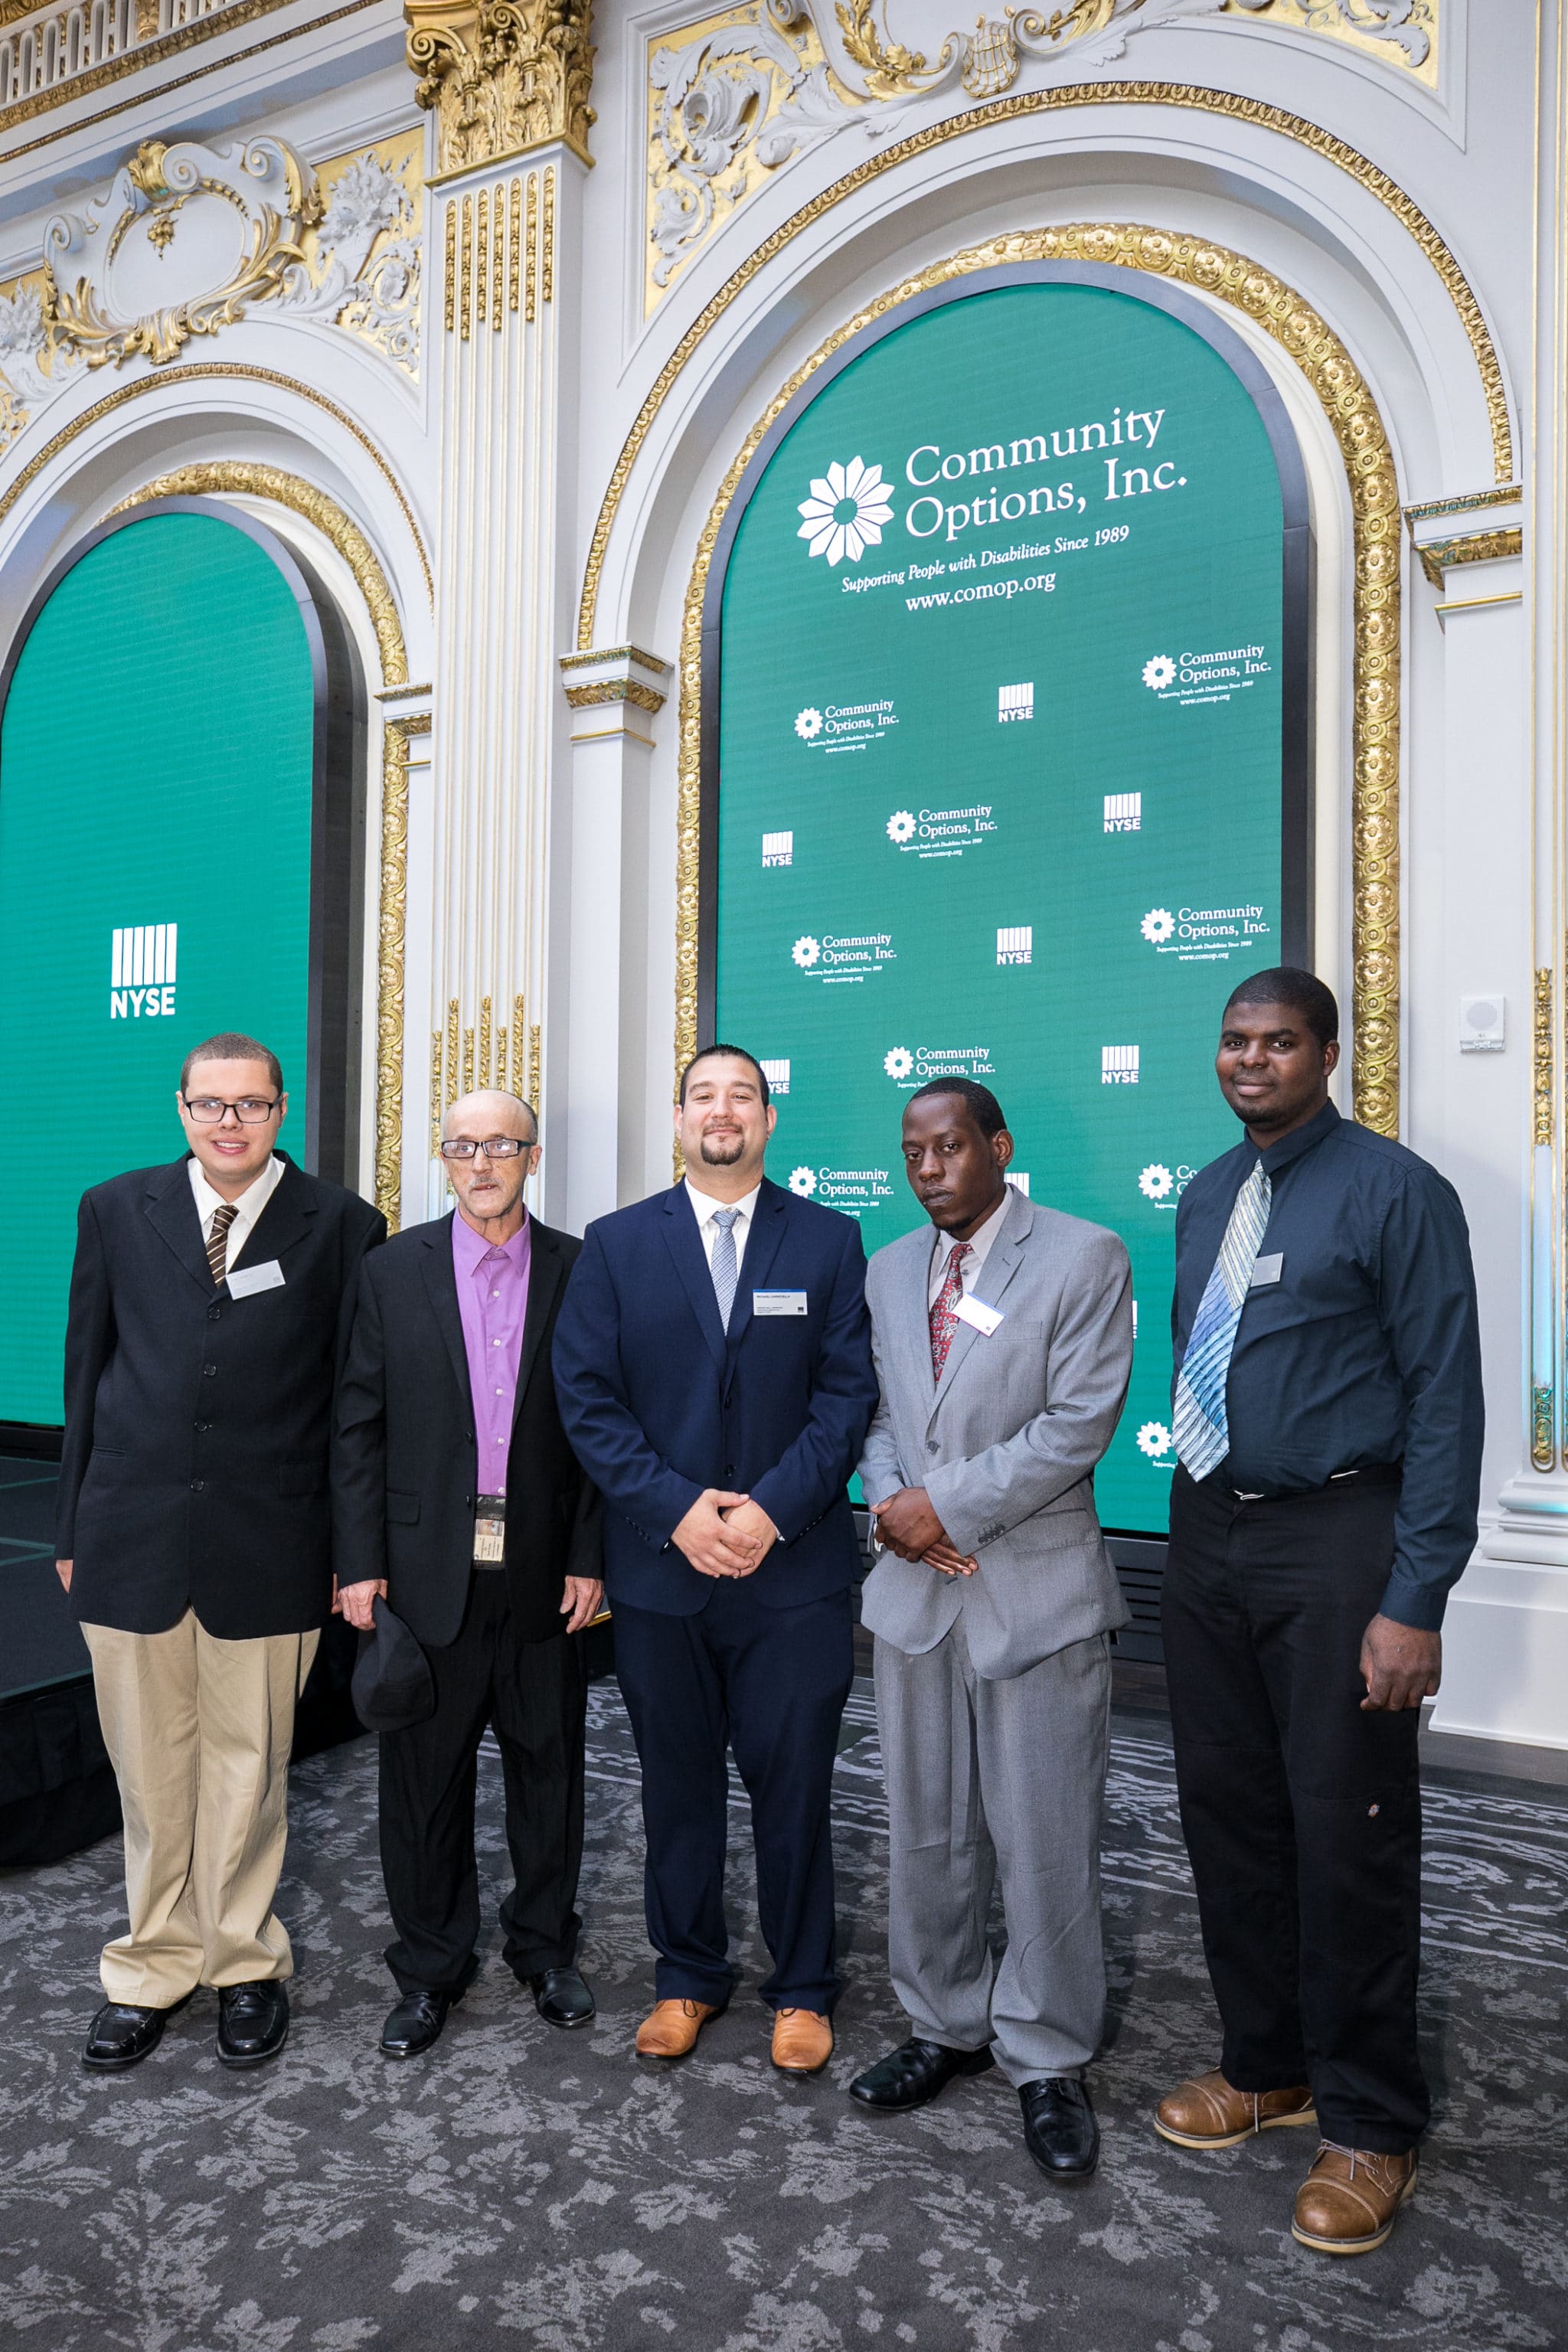 On Thursday, August 17, 2017, The New York Stock Exchange welcomes executives and guests of Community Options, Inc. to celebrate 10 years of providing housing and employment support to individuals with intellectual and developmental disabilities in South Carolina, Community Options will hold its 11th Annual iMatter Conference at the Francis Marion Hotel from September 24-27. To honor the occasion, Phil Lian,Board Member, rings the NYSE Opening Bell®.